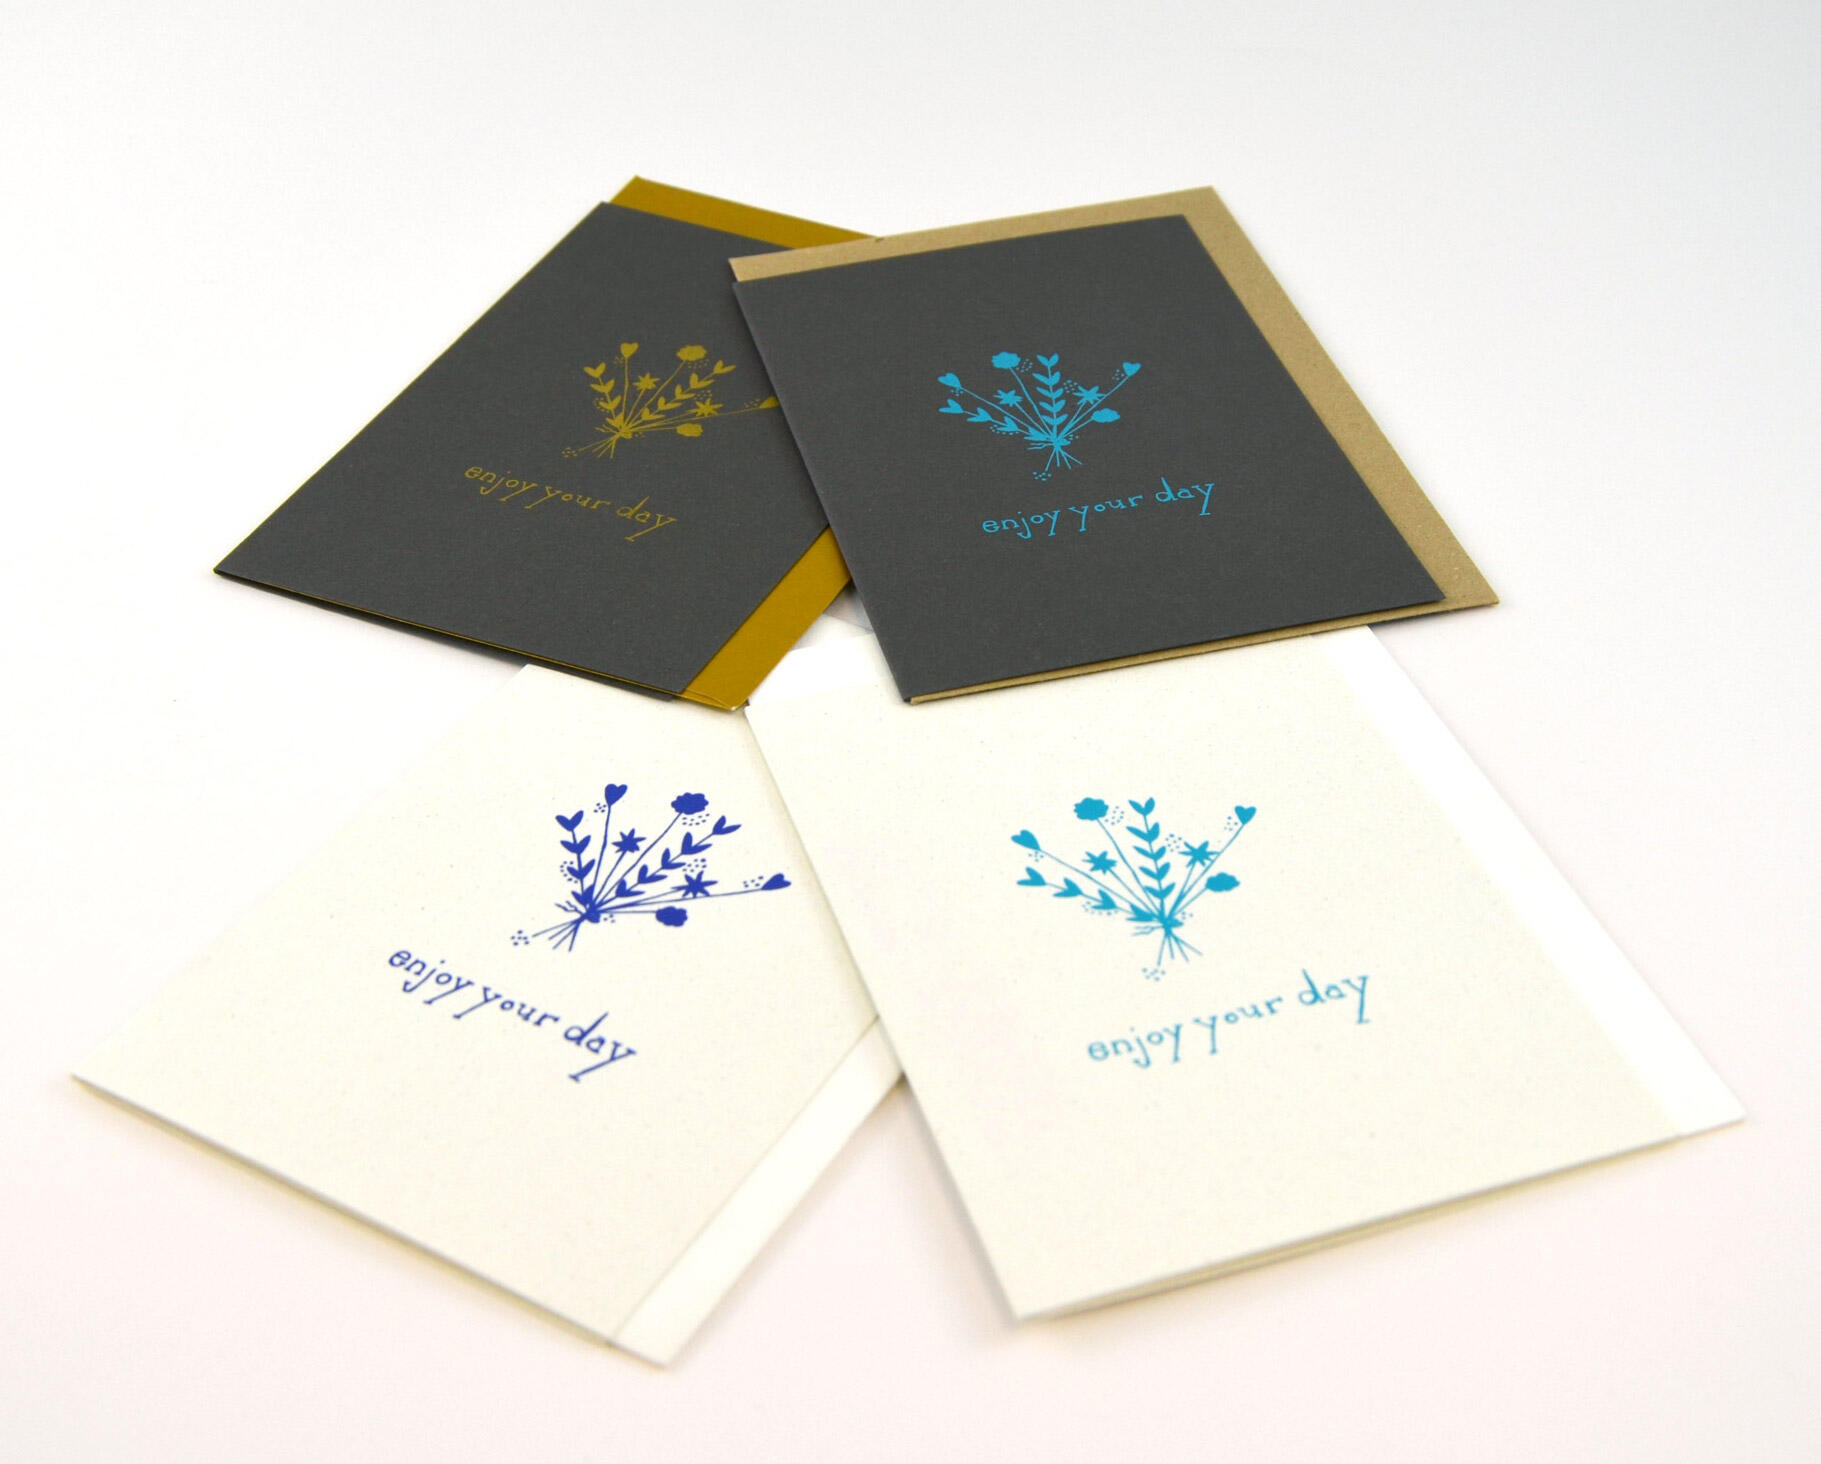 Greeting card "Enjoy your day", hand printed (vers. colors), with envelope